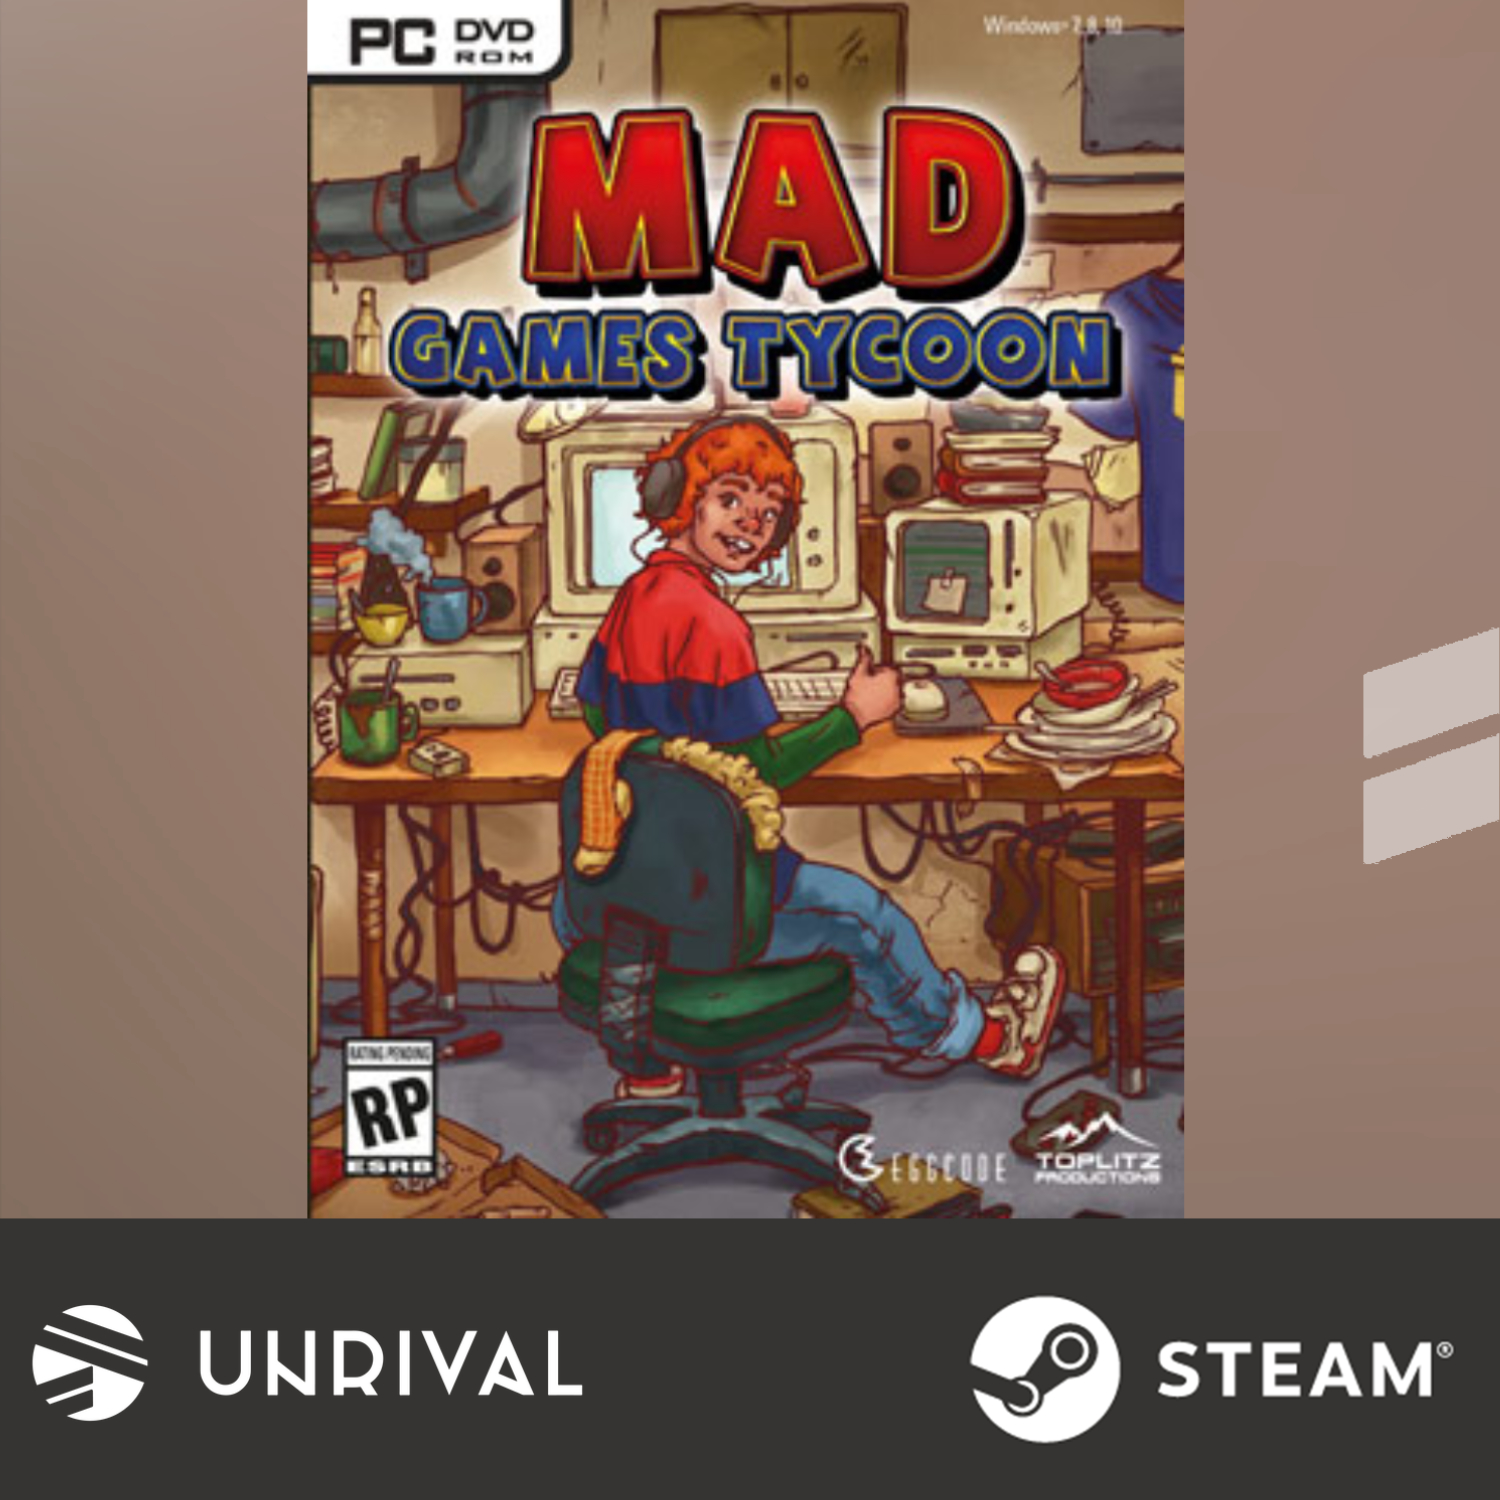 [Hot Sale] Mad Games Tycoon PC Digital Download Game (Single Player) - Unrival